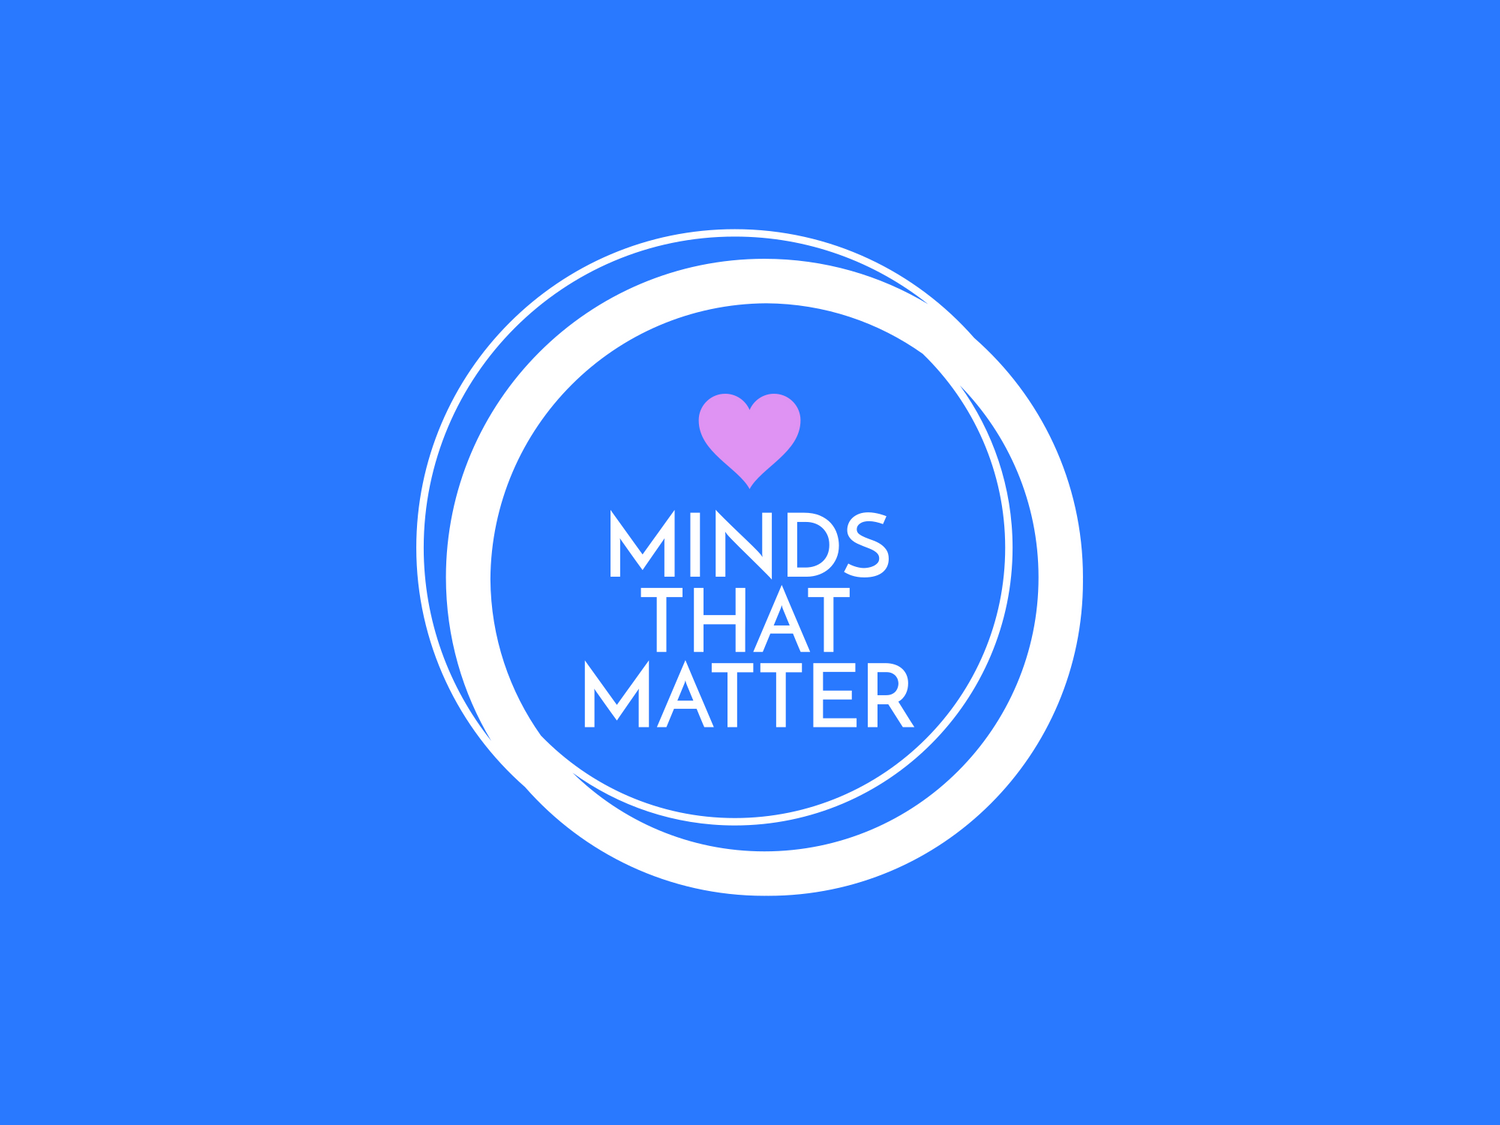 Gallery Photo of Minds that Matter